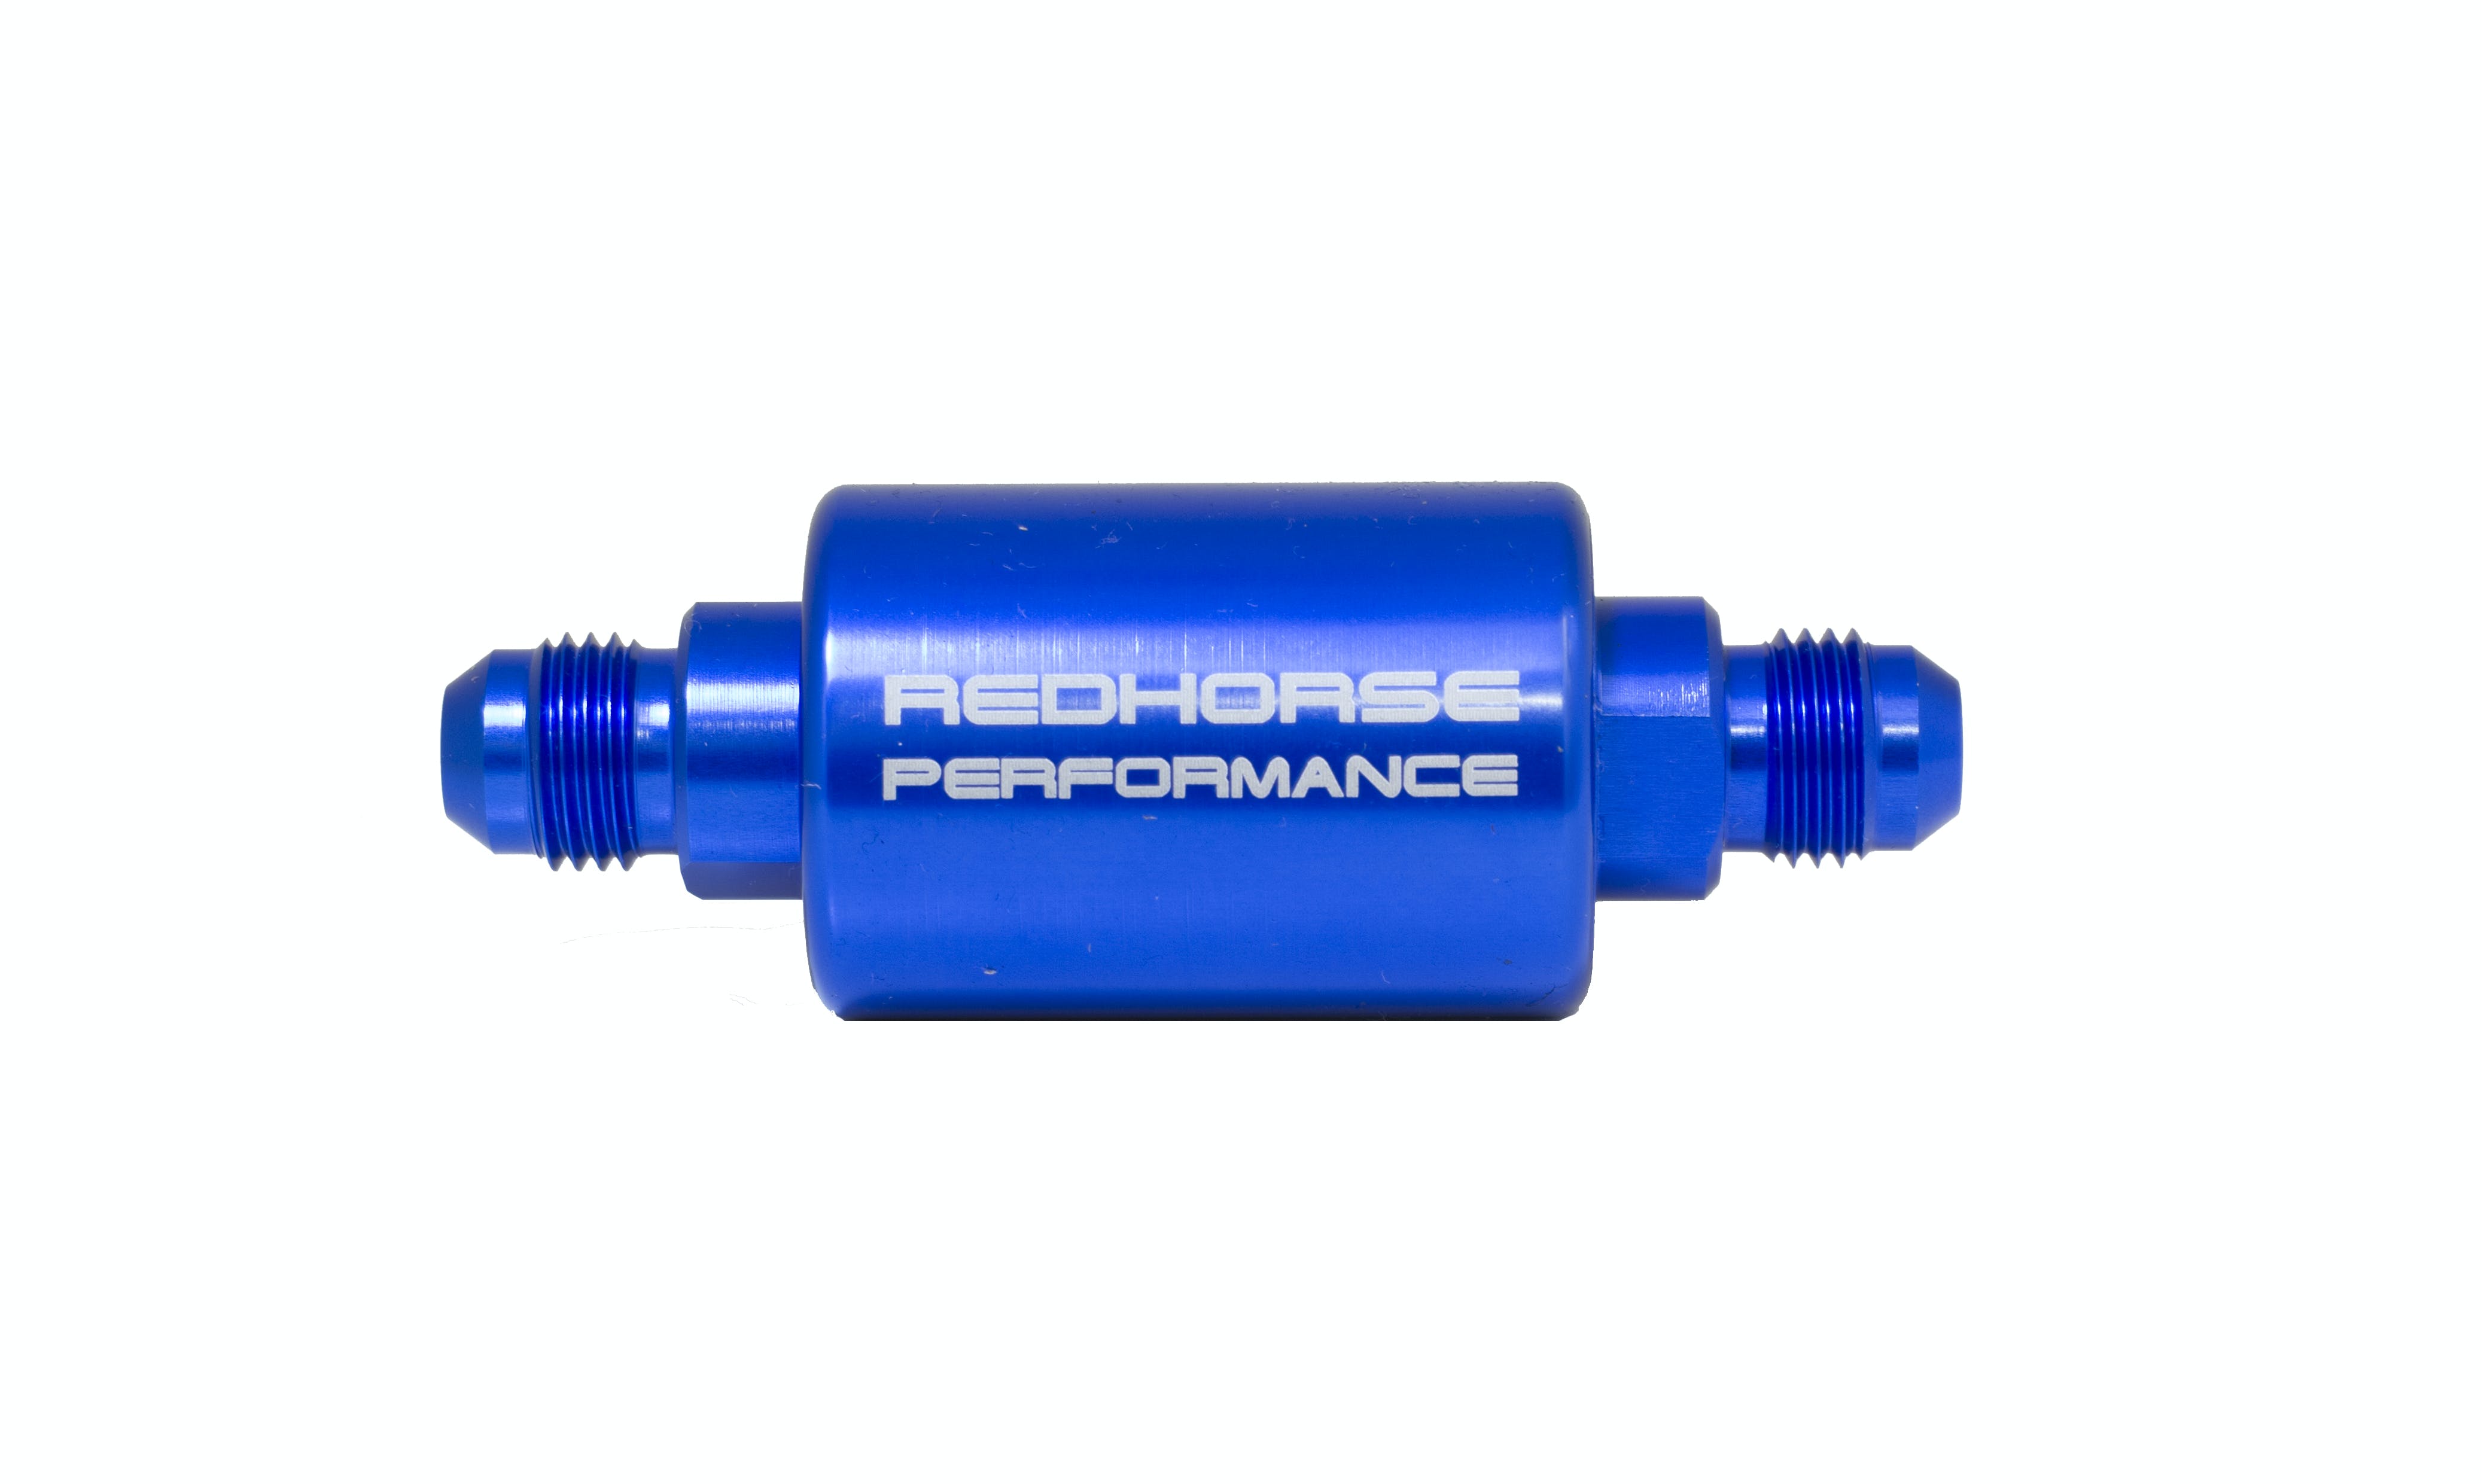 Redhorse Performance 4151-08-1 -08 inlet -08 outlet AN high flow fuel filter - blue